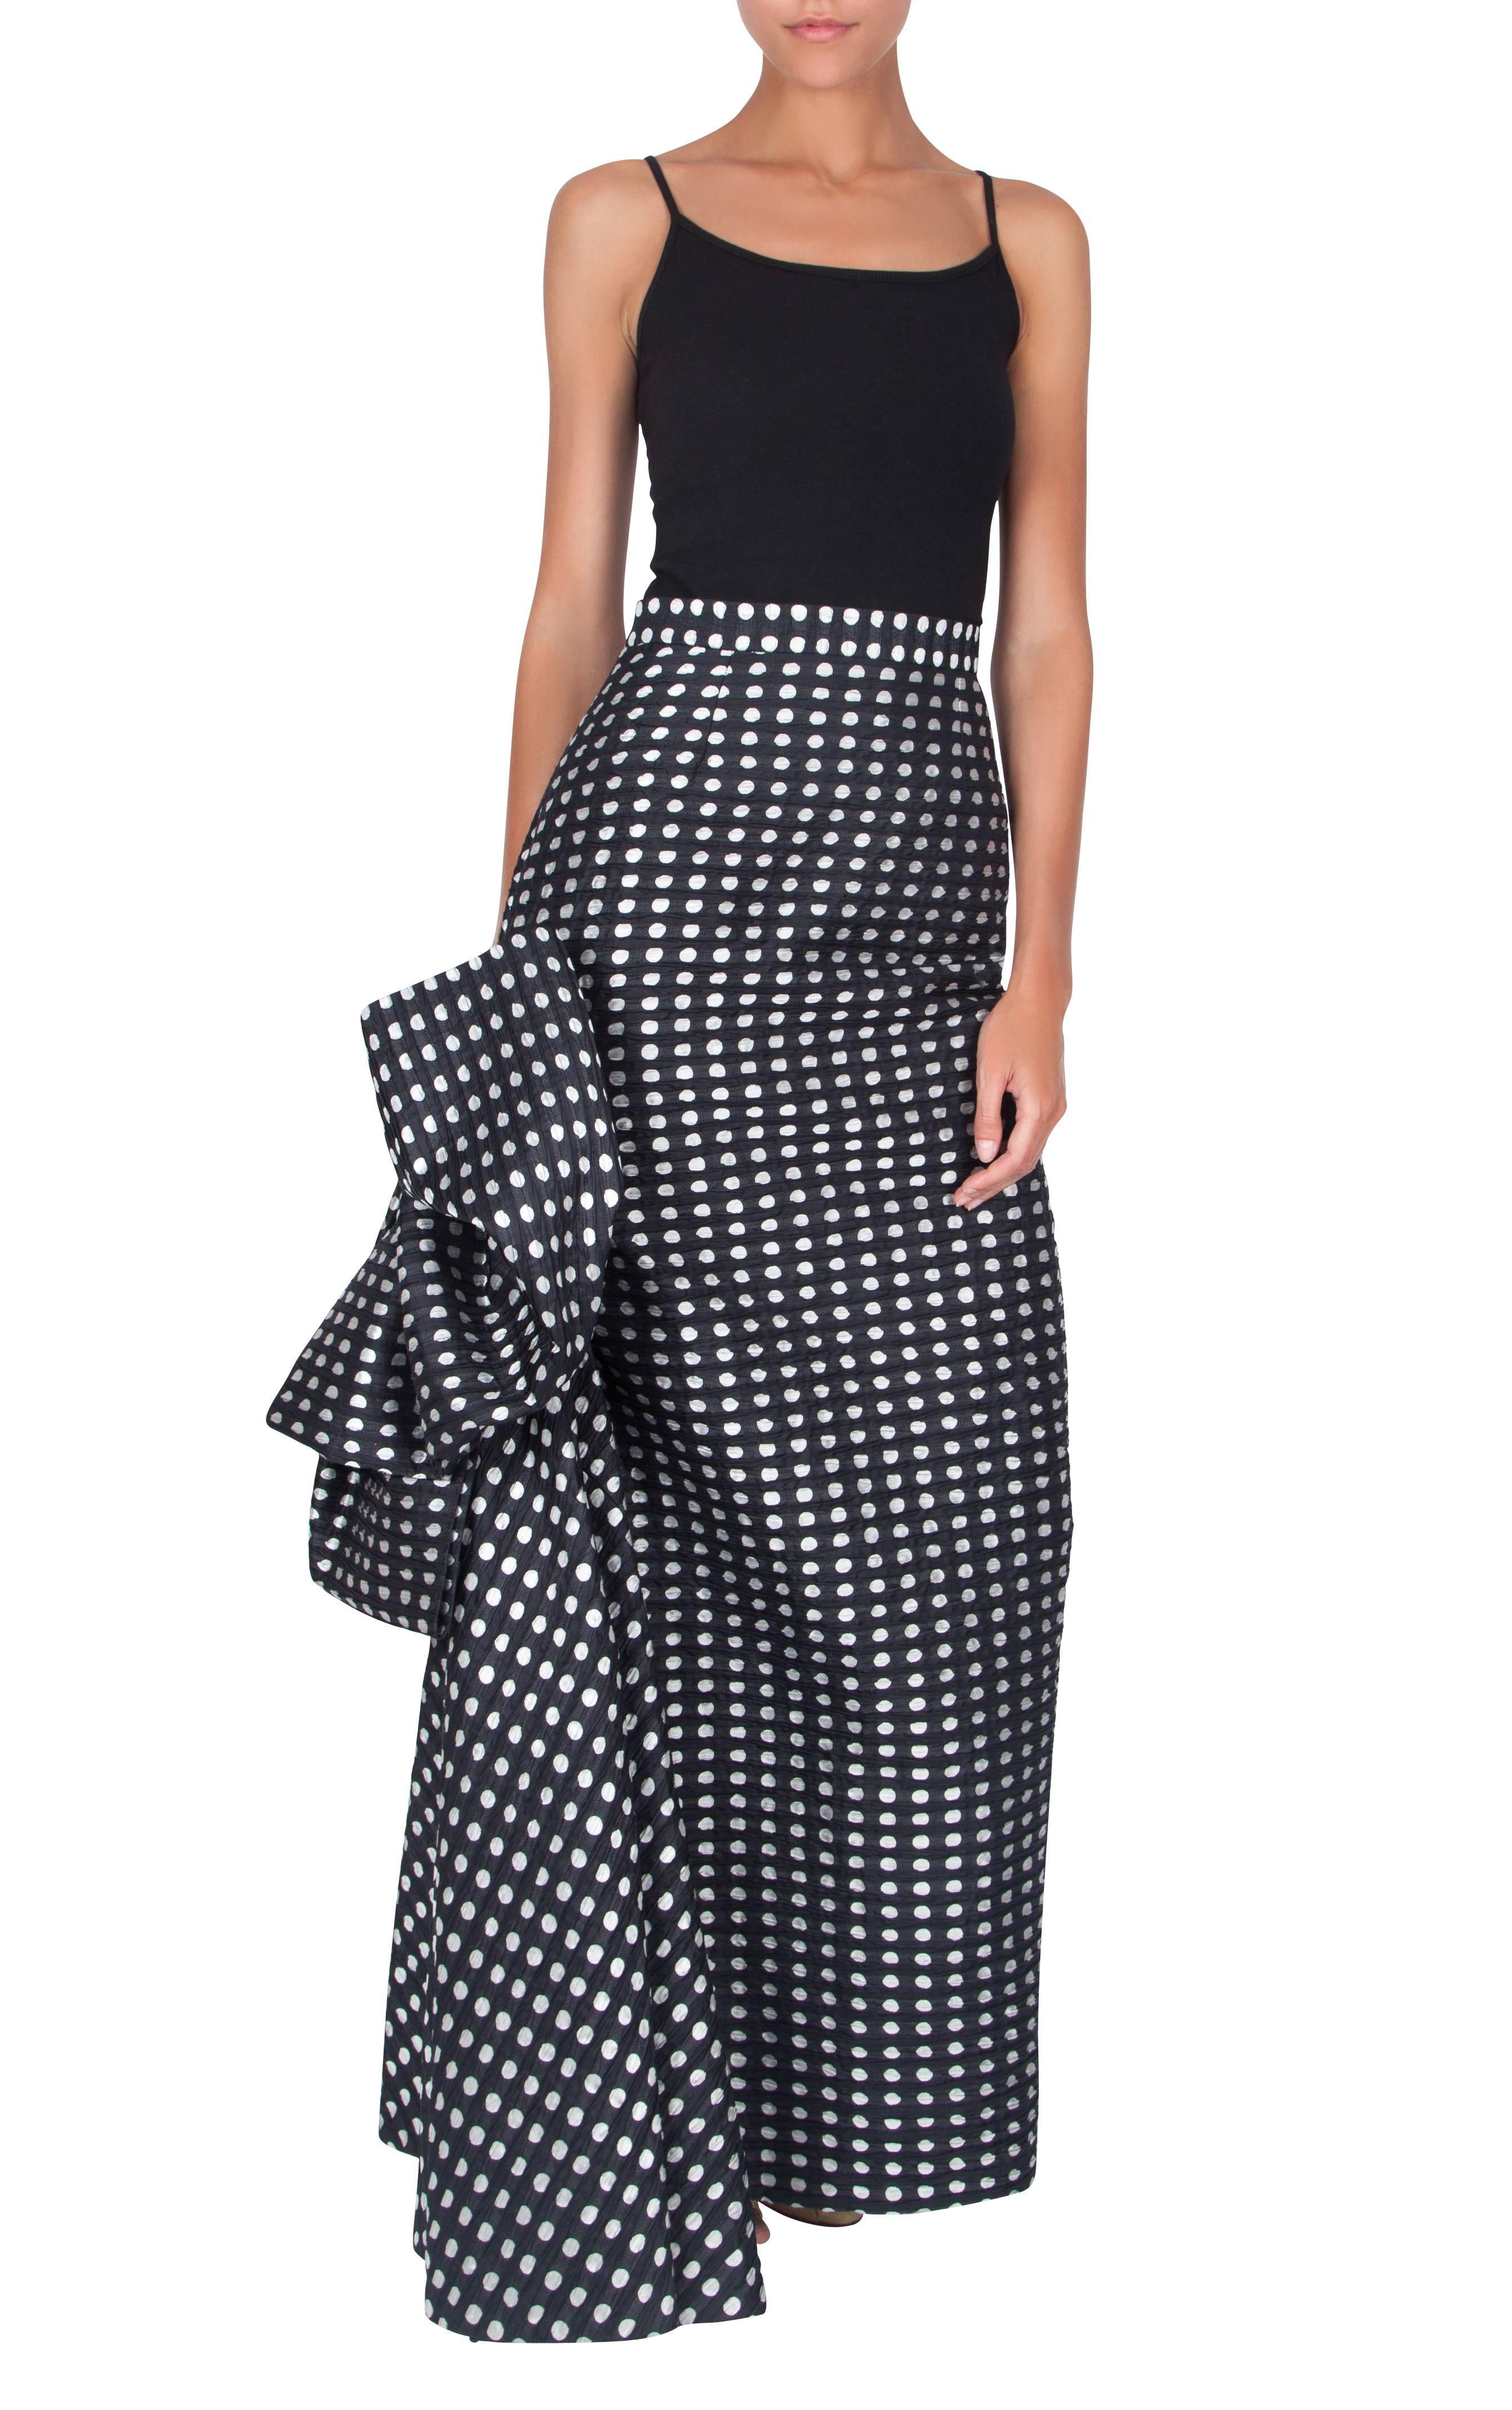 A statement 1980's Yves Saint Laurent maxi skirt, made from a textured silk fabric in a polka dot pattern. The focal point of the skirt is the dramatic oversized bow on the right side, which contrasts with the otherwise simple and straight design of